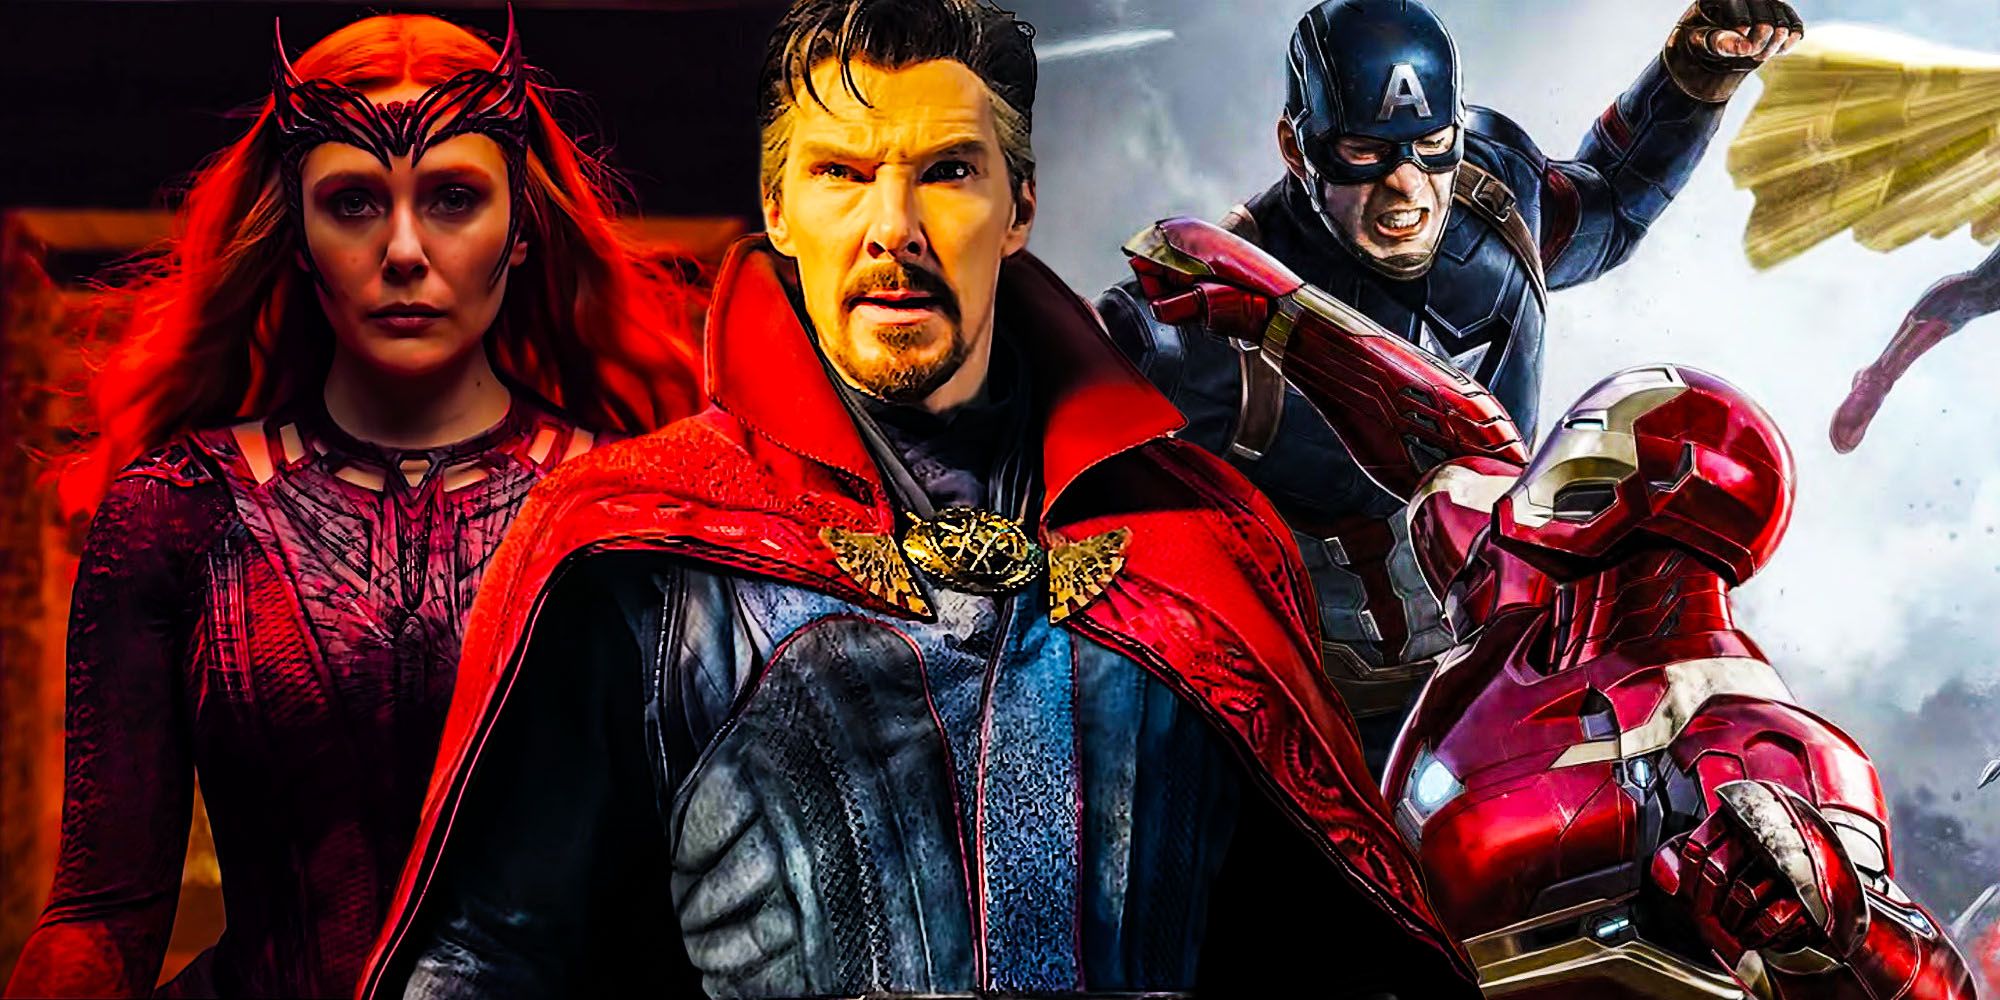 Doctor strange multiverse of madness repeats civil war iron man vs captain america scarlet witch